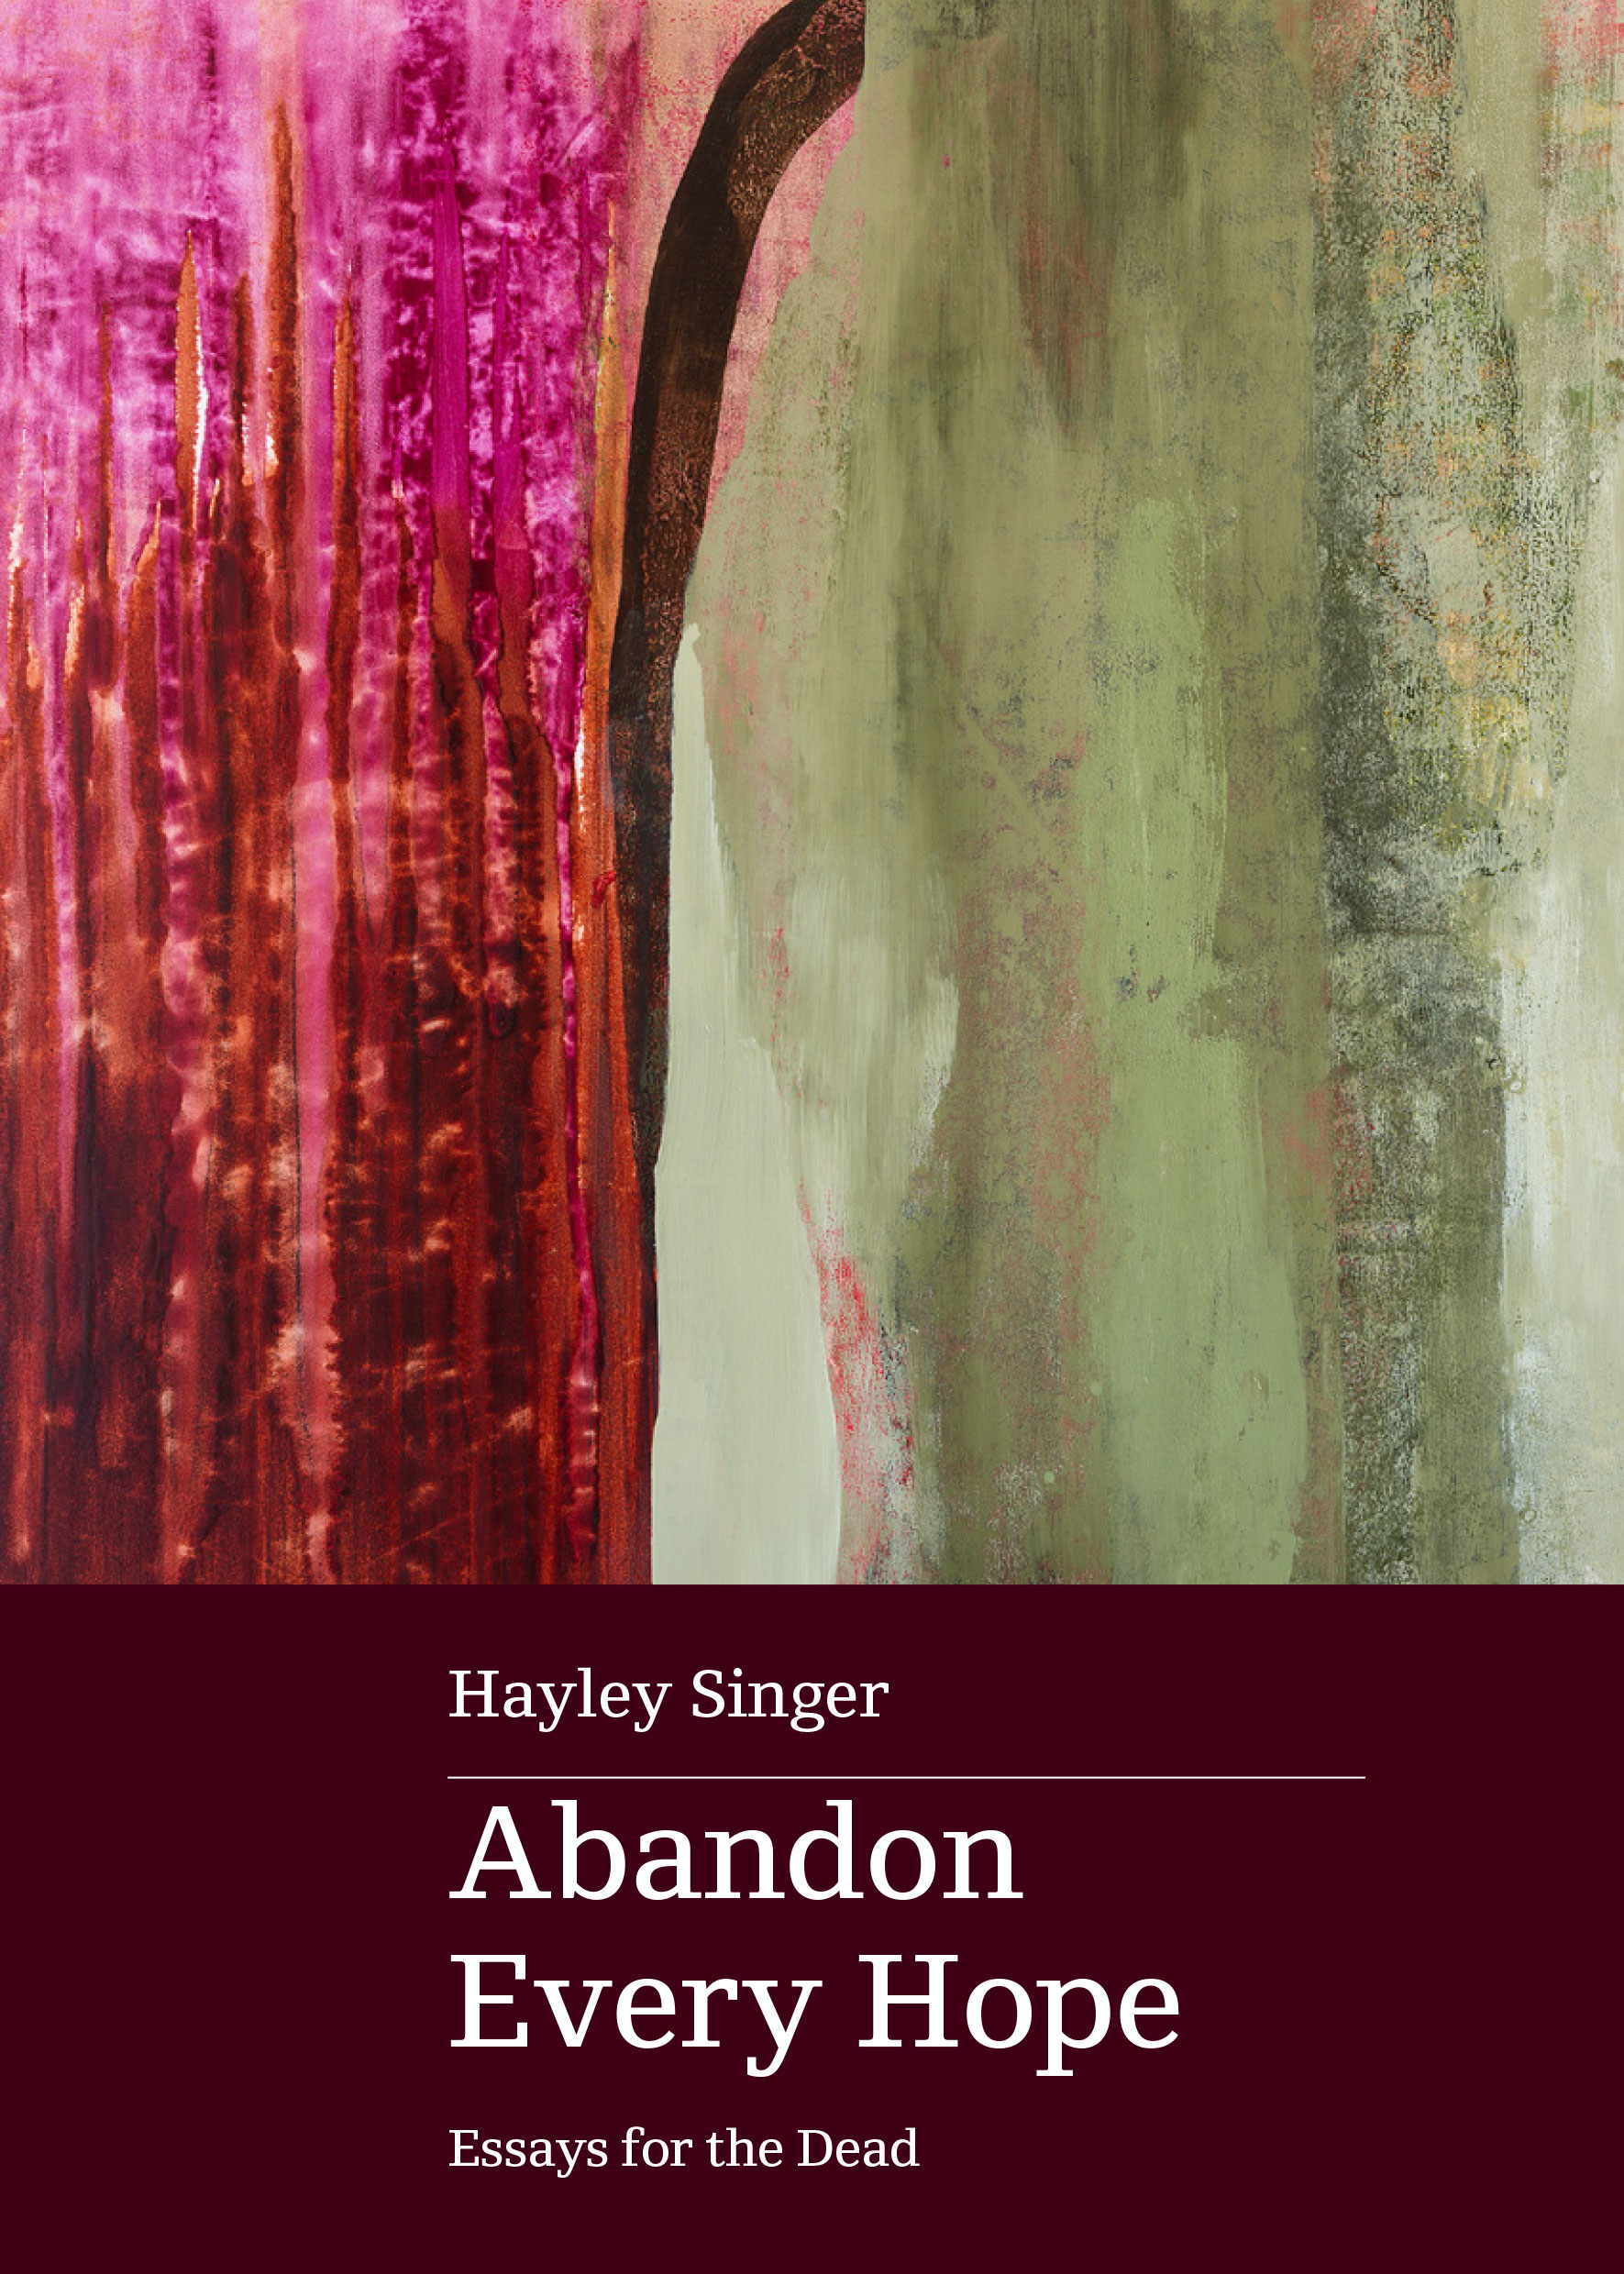 A book cover showing an abstract painting, red on the left and bone-coloured on the right